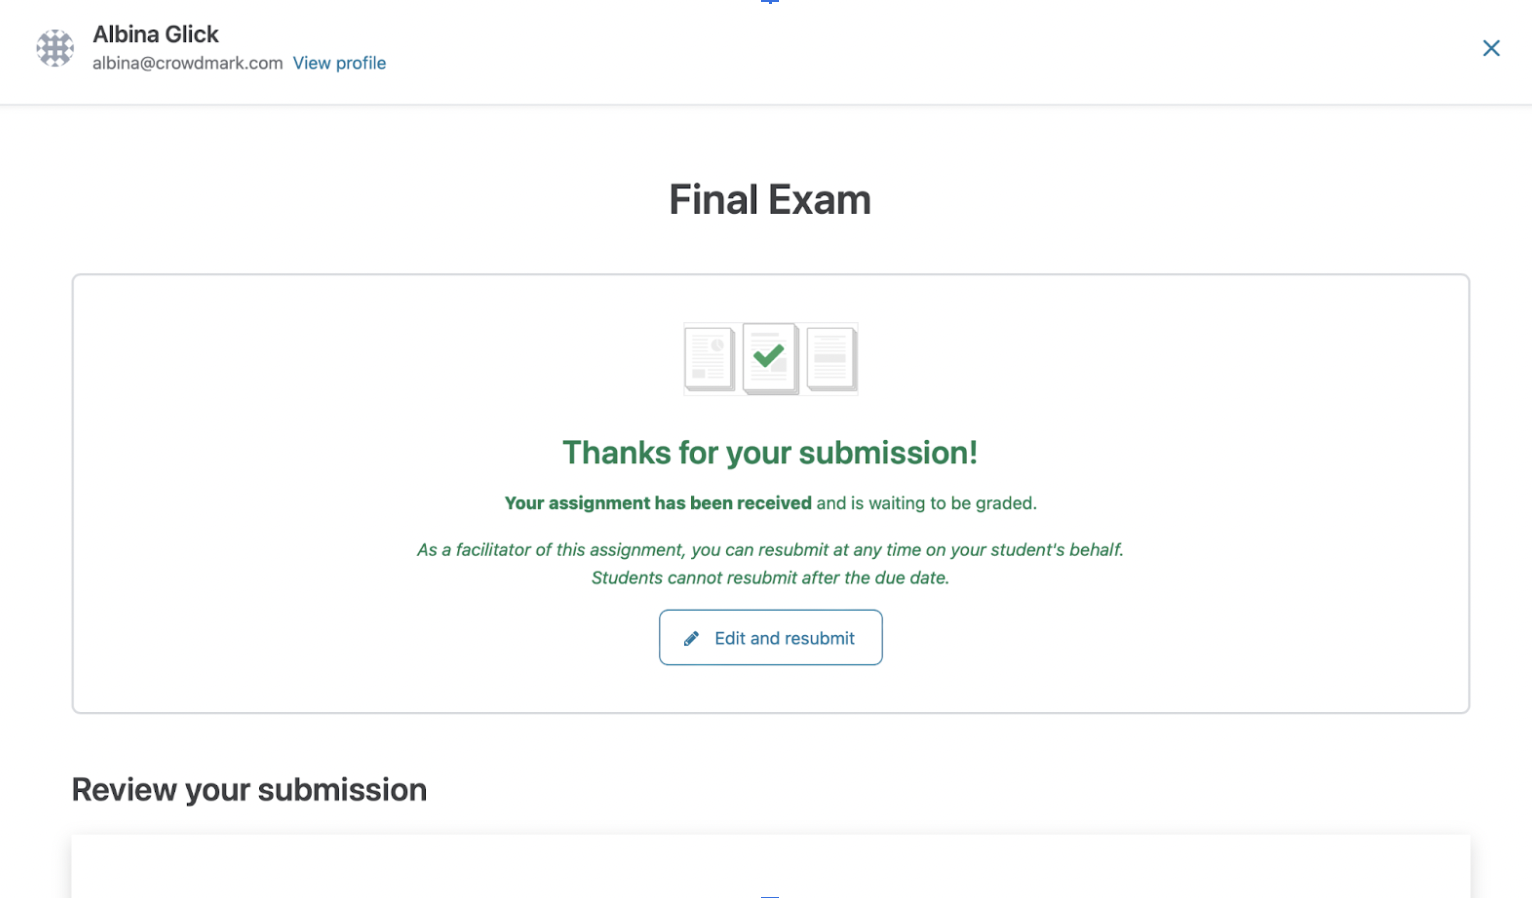 Submission successfully received!